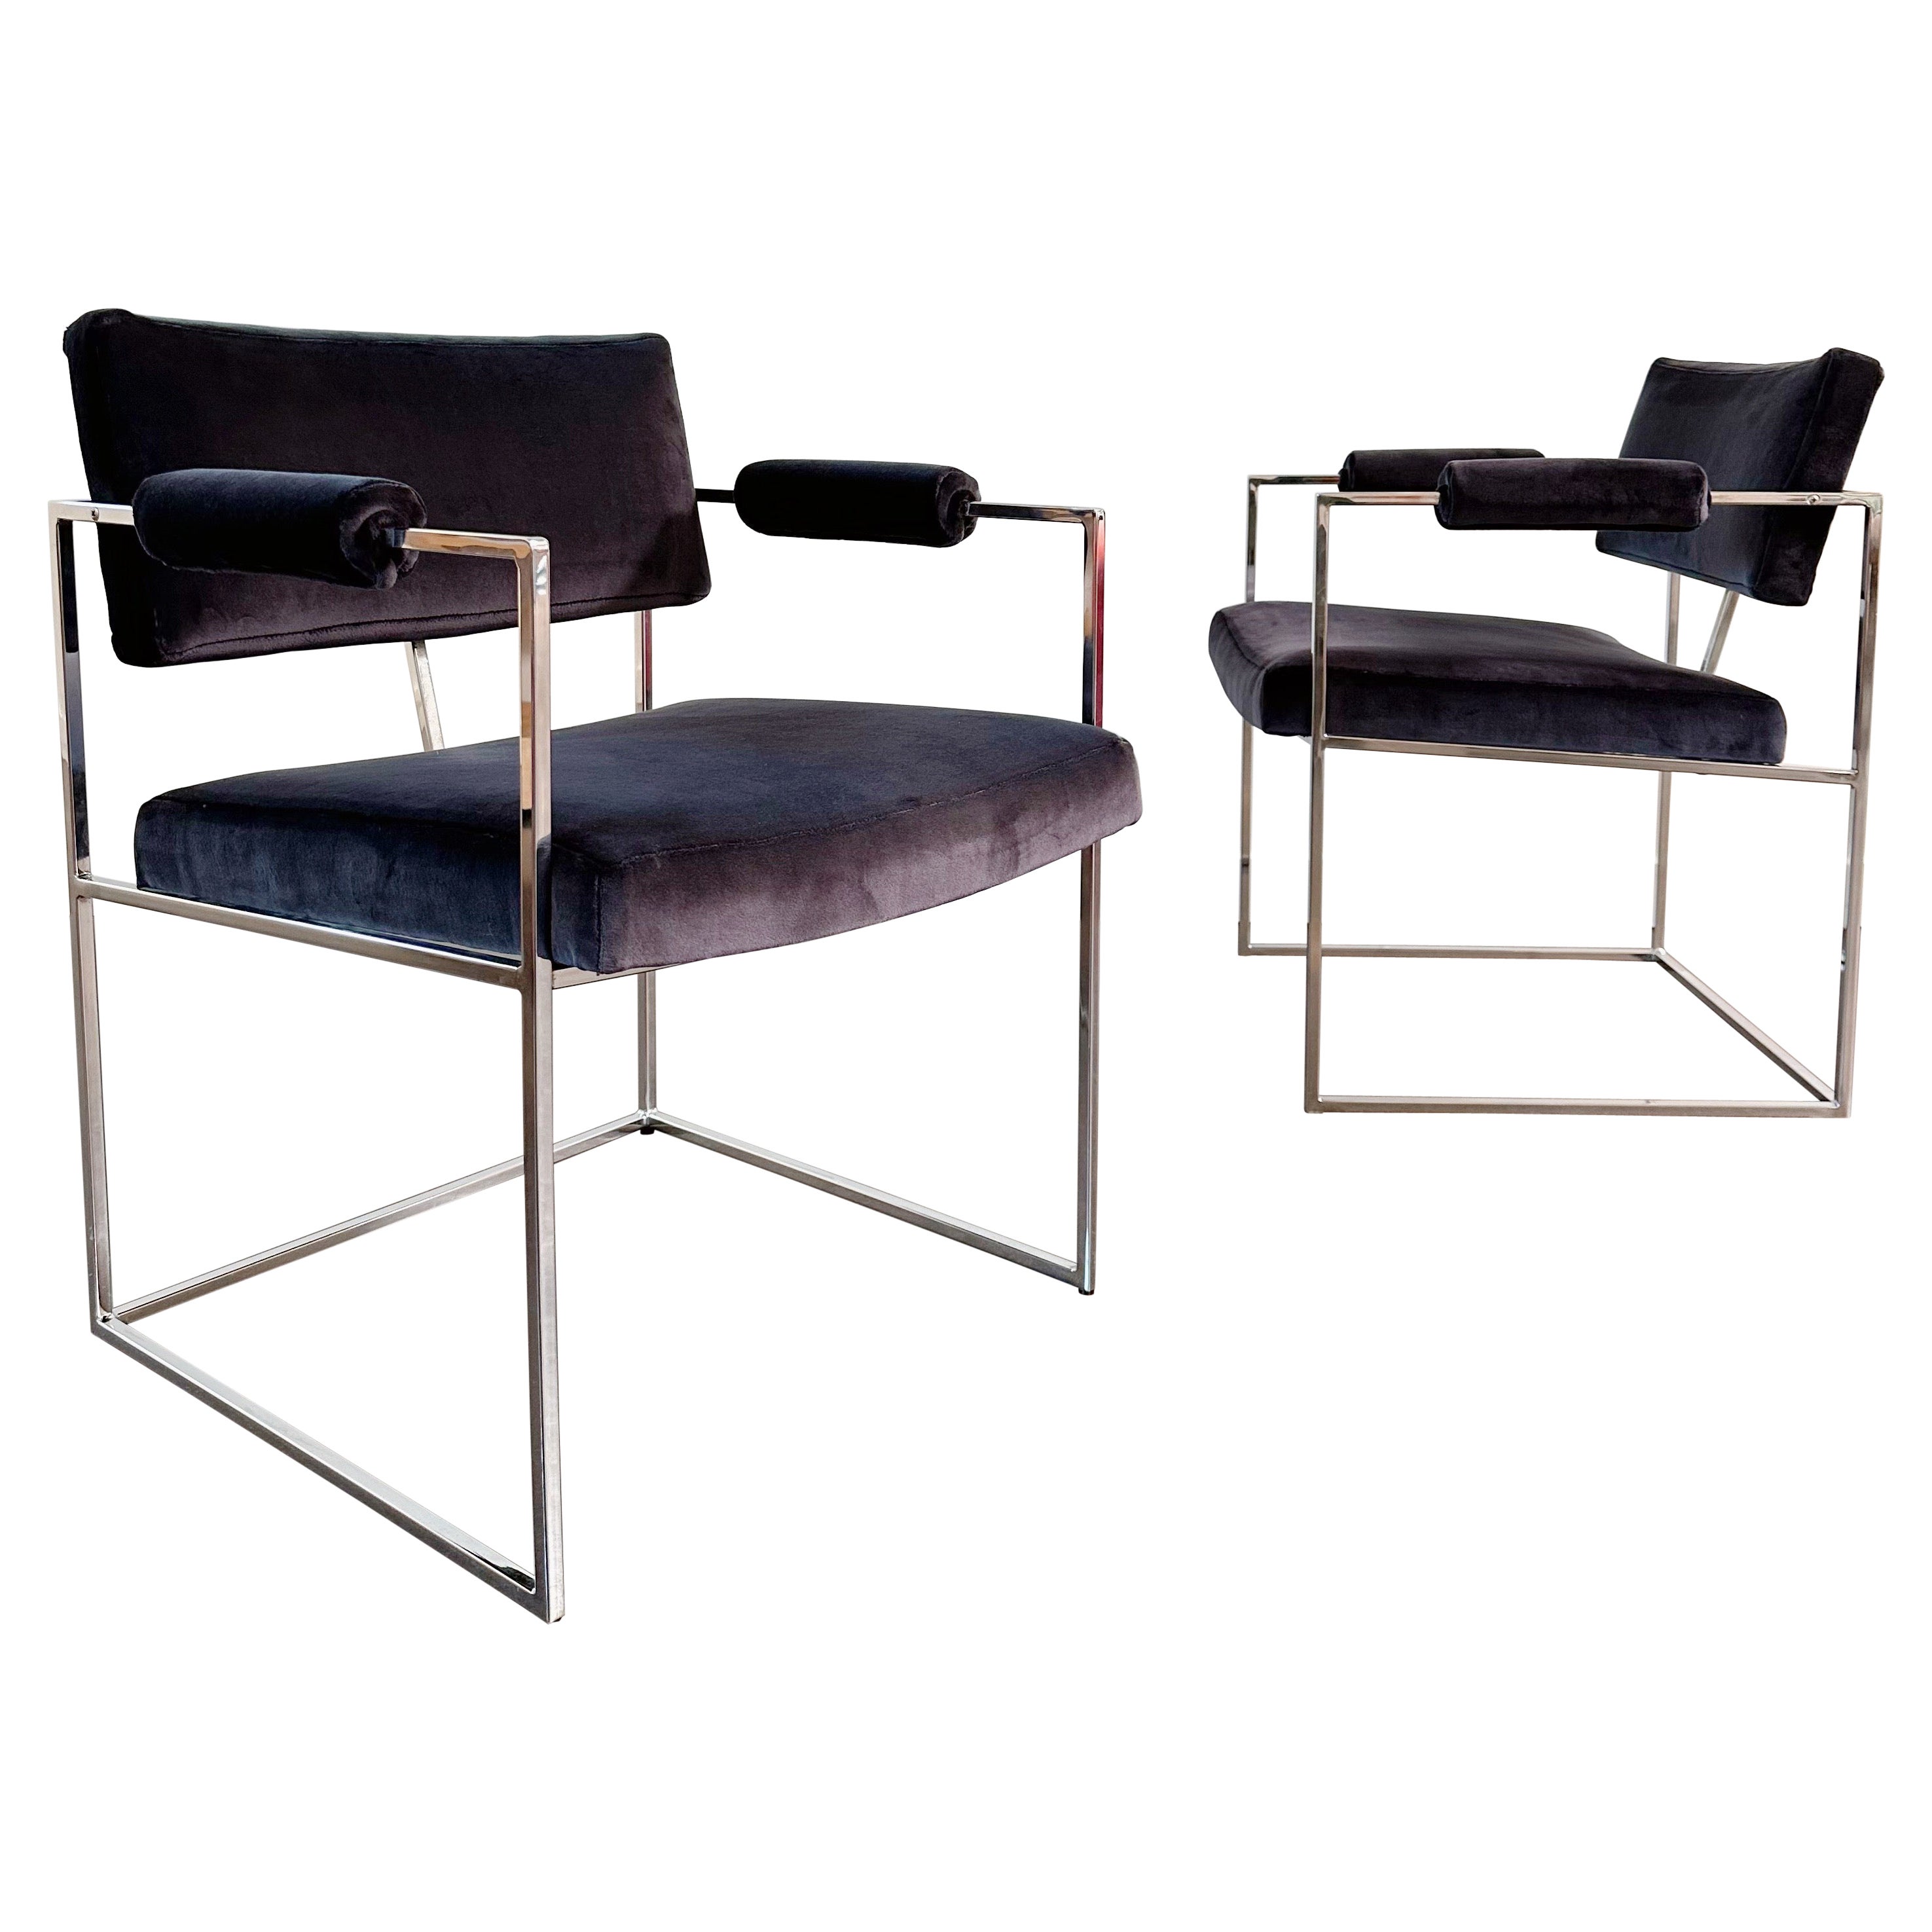 A Pair of 1188 'Thin Line' Armchairs by Milo Baughman